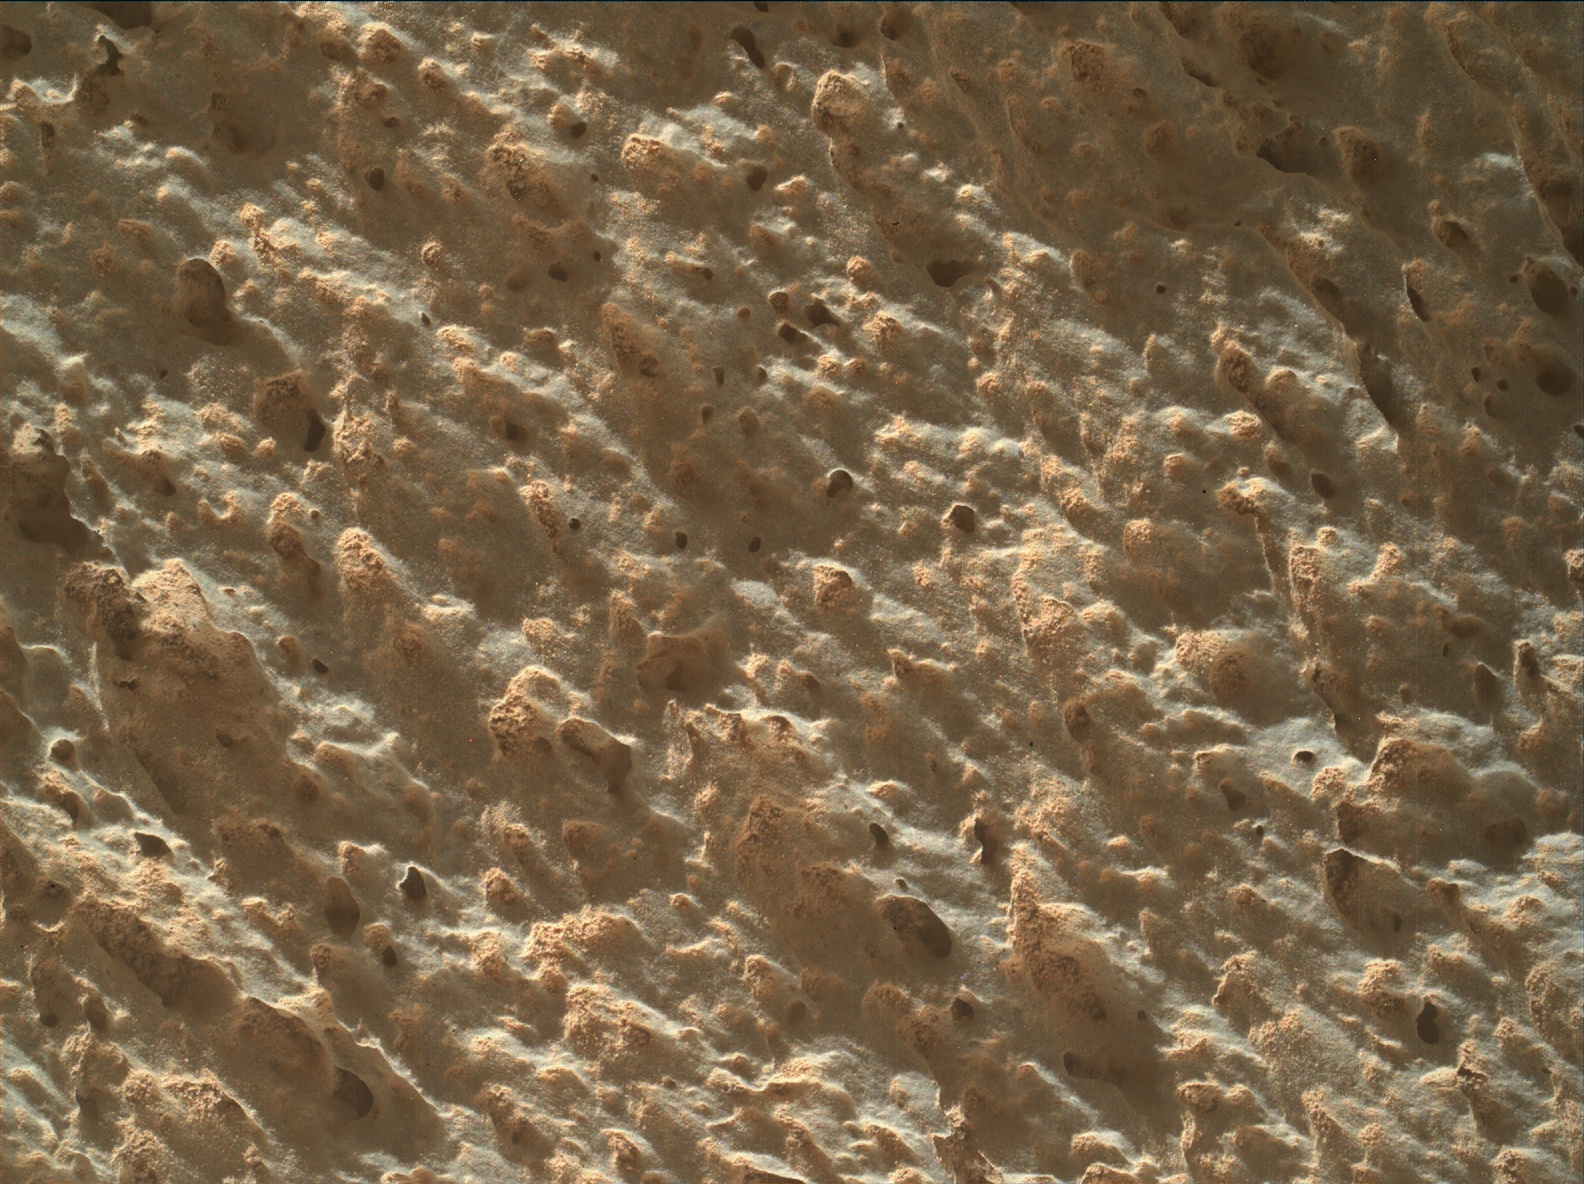 Nasa's Mars rover Curiosity acquired this image using its Mars Hand Lens Imager (MAHLI) on Sol 3427